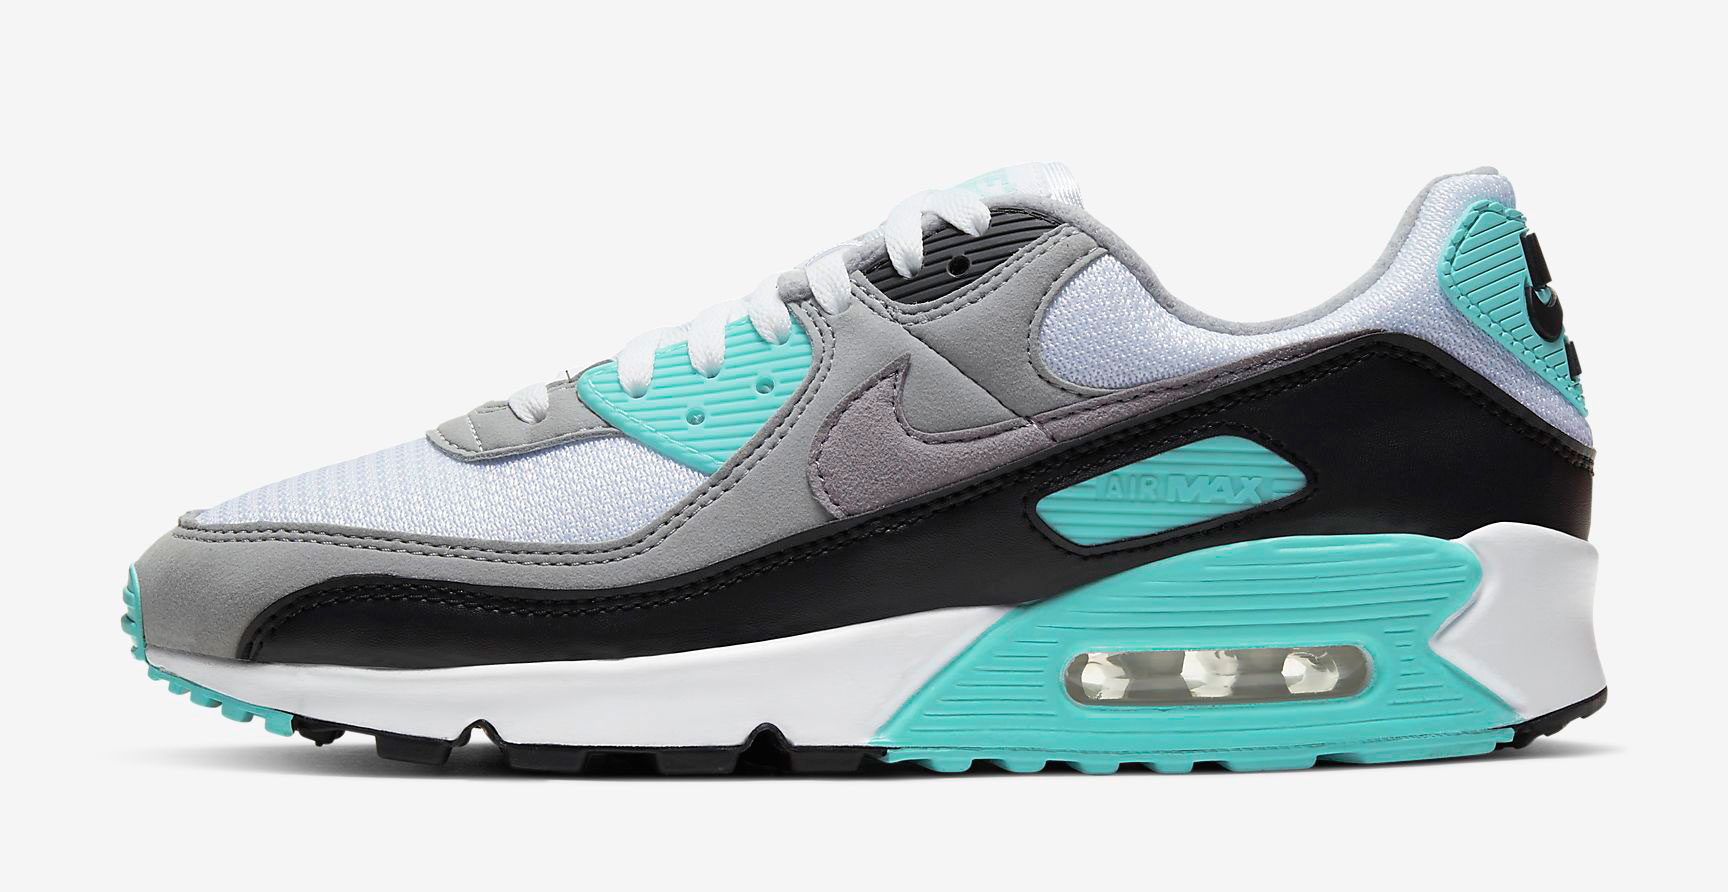 nike-air-max-90-hyper-turquoise-release-date